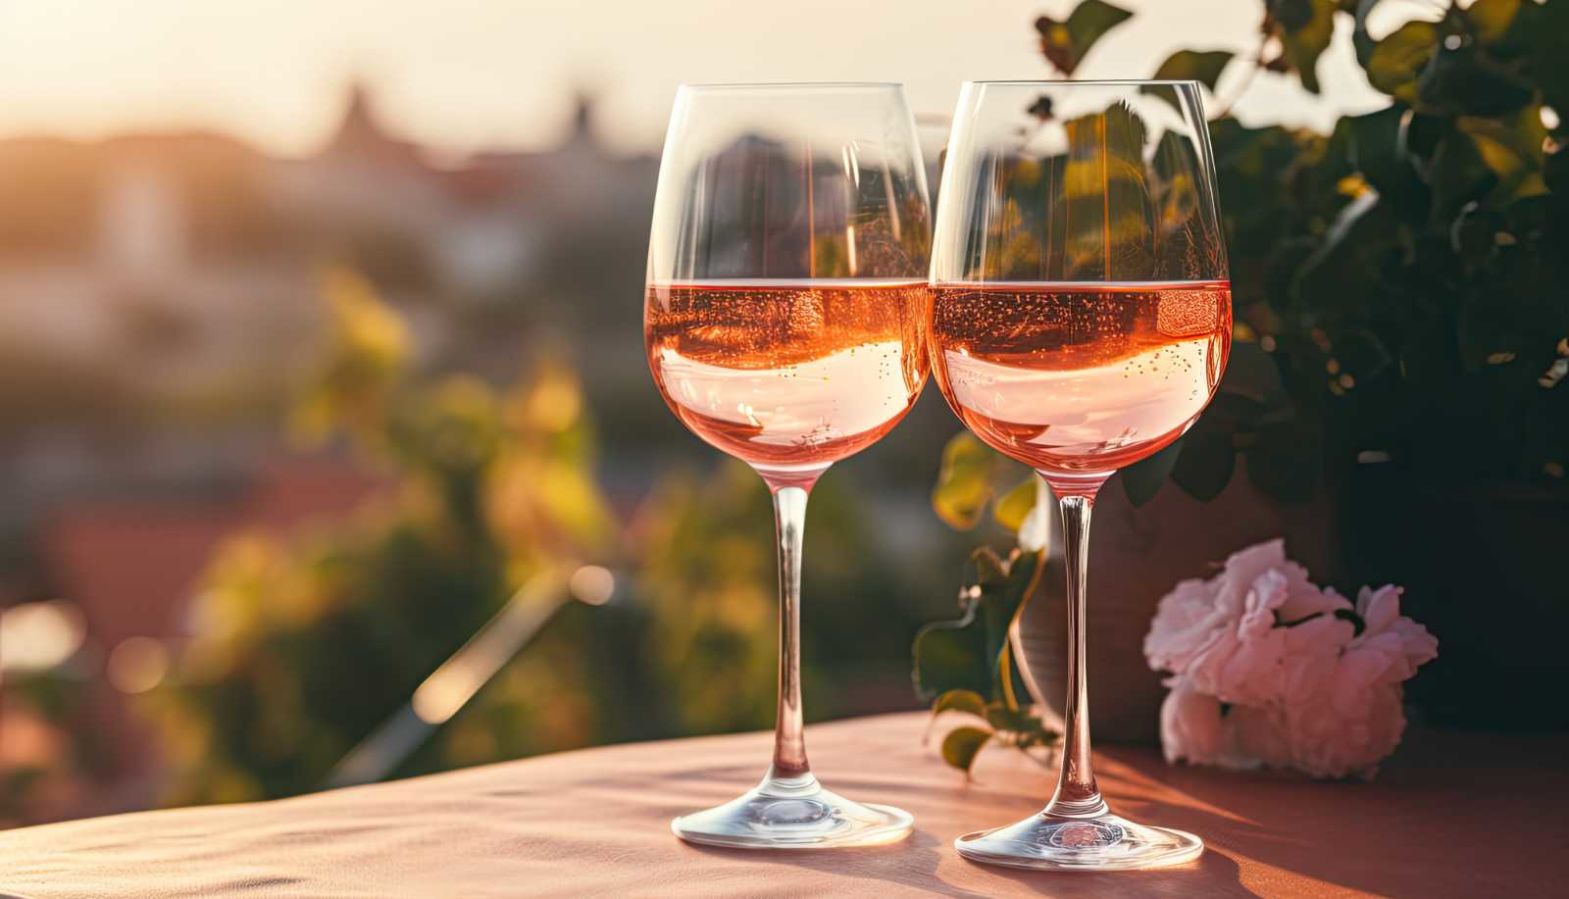 Is rosé wine sweet or dry? - two glasses of rose wine on a table near sunset